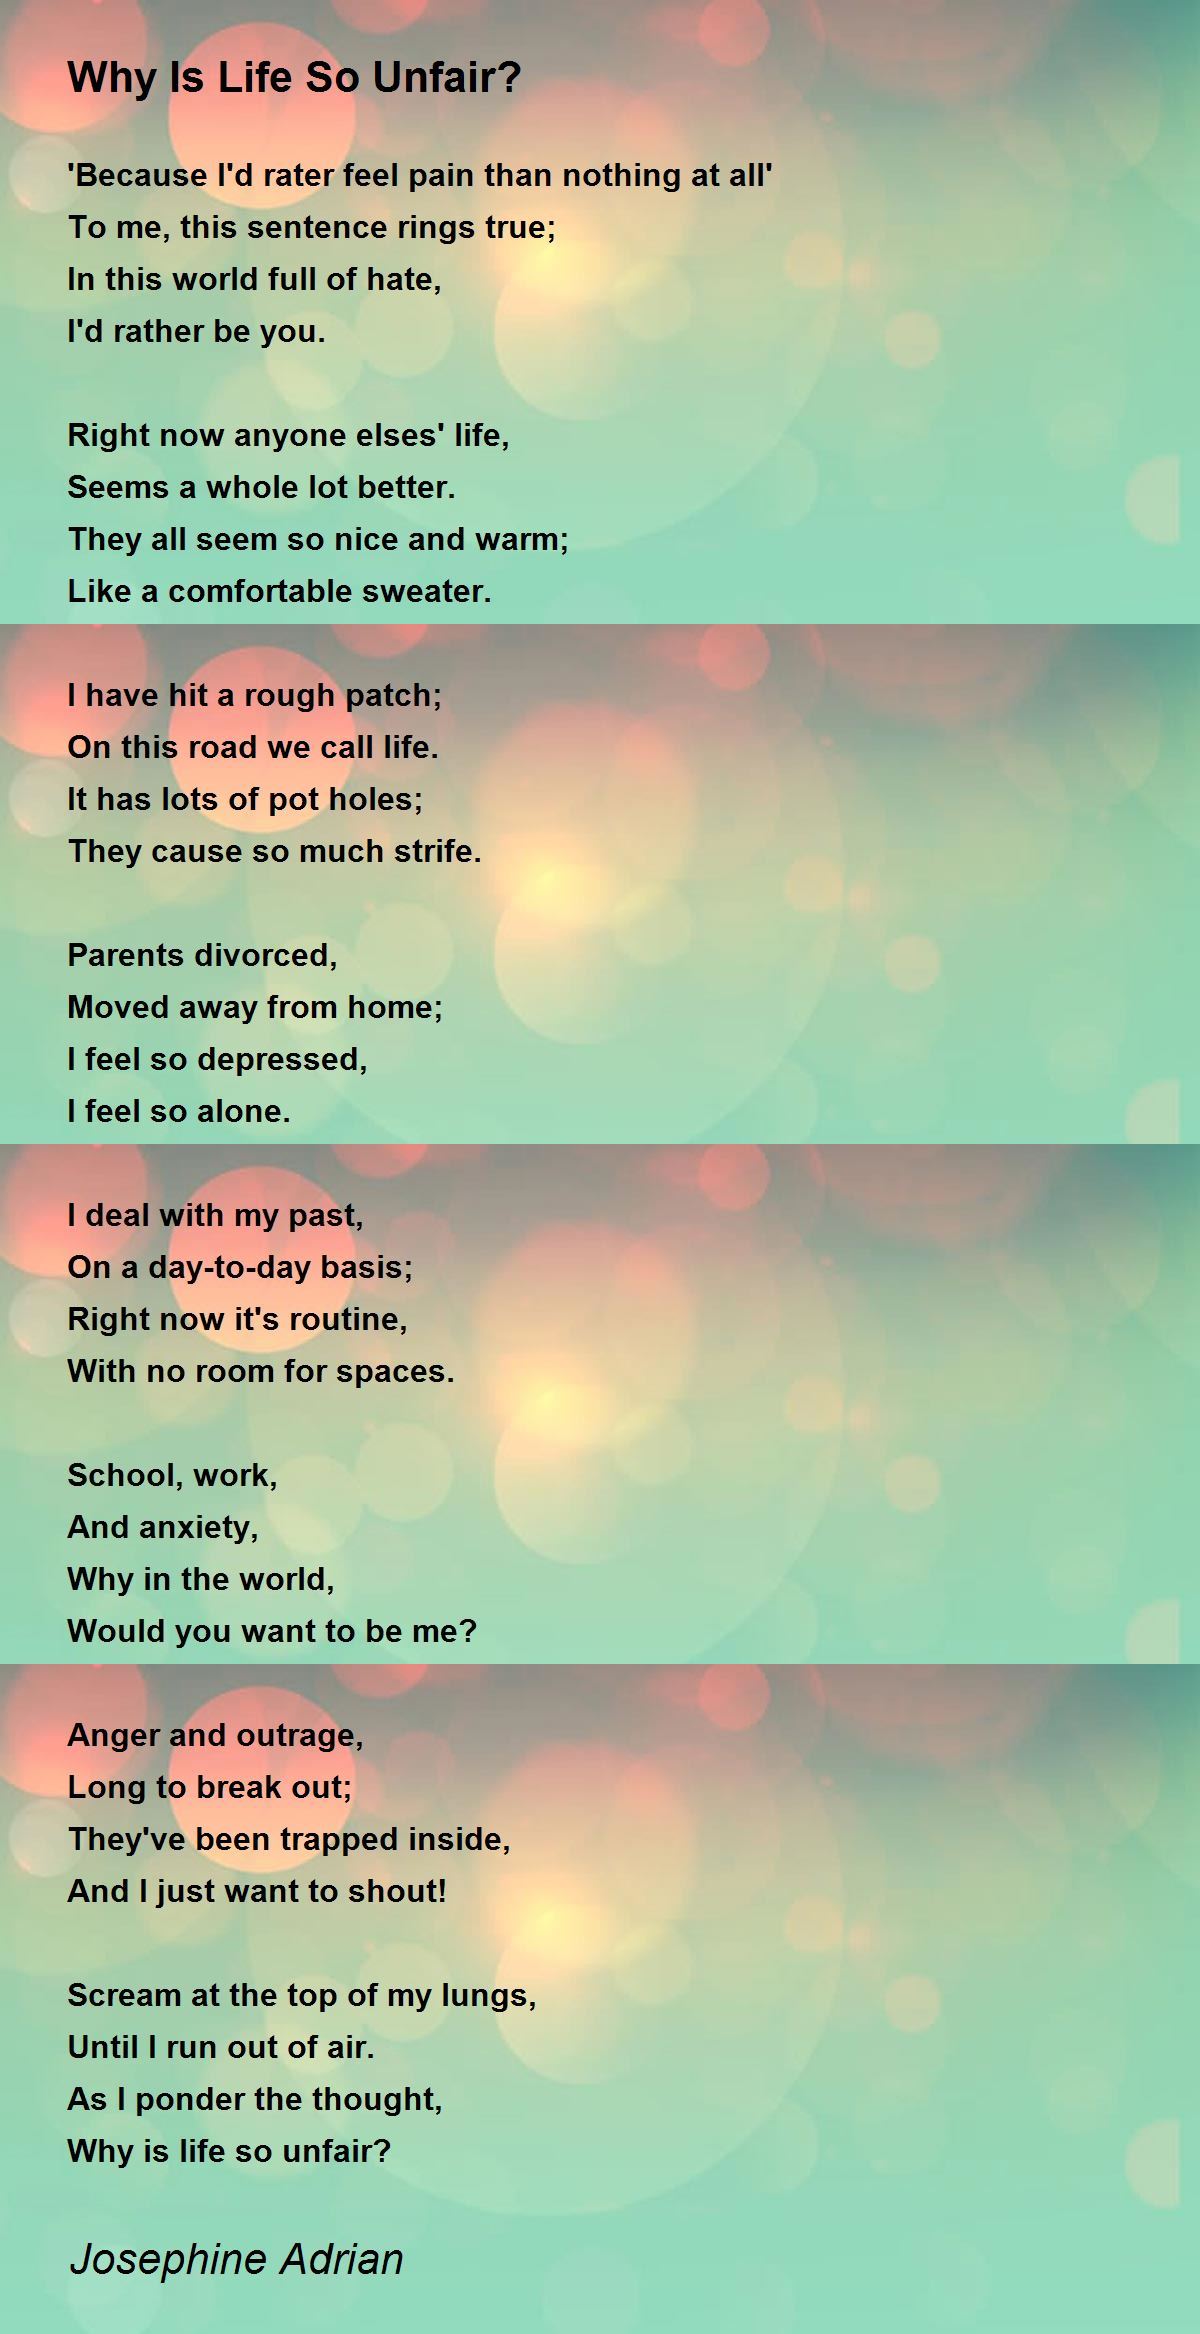 Why Is Life So Unfair? Poem by Josephine Adrian - Poem Hunter